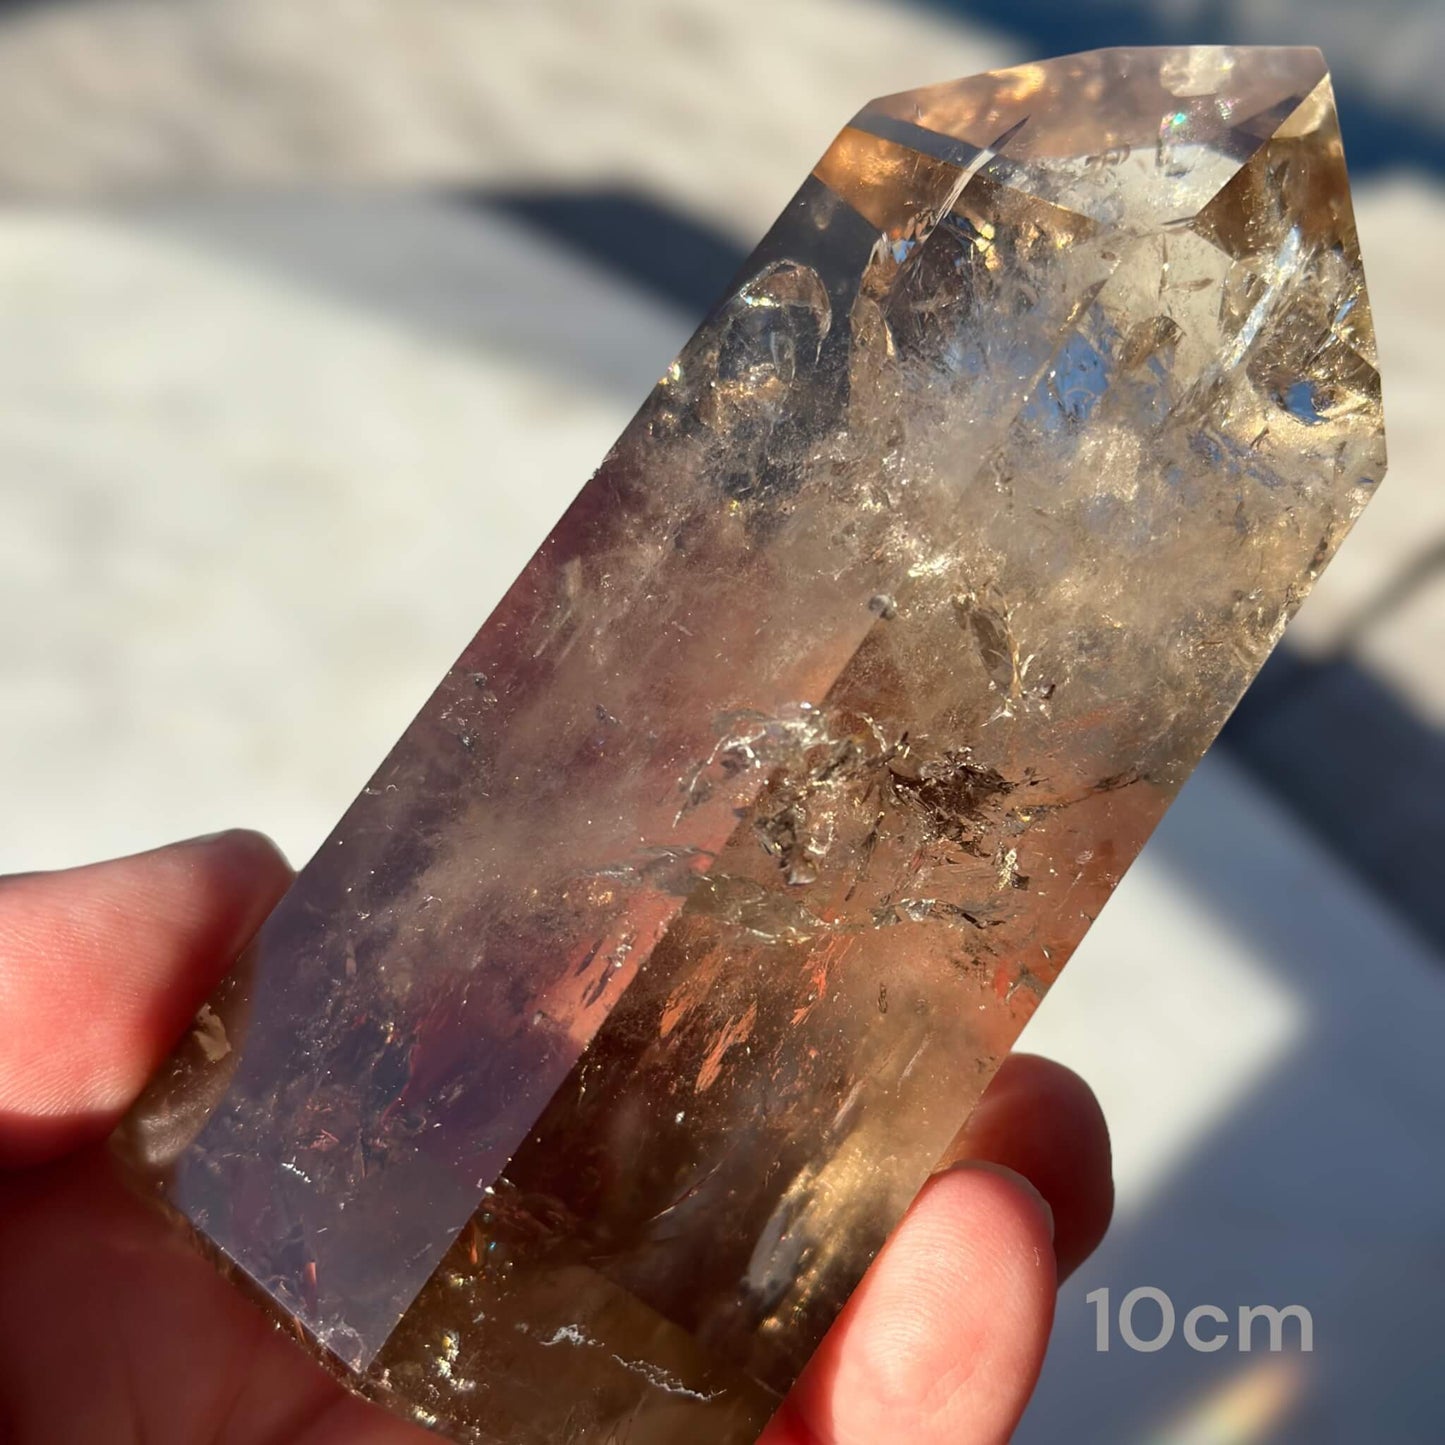 Front of 10cm Smoky Quartz Crystal Generator held in a hand: A stunning 10cm Smoky Quartz crystal generator, displaying its intricate natural patterns and hues.